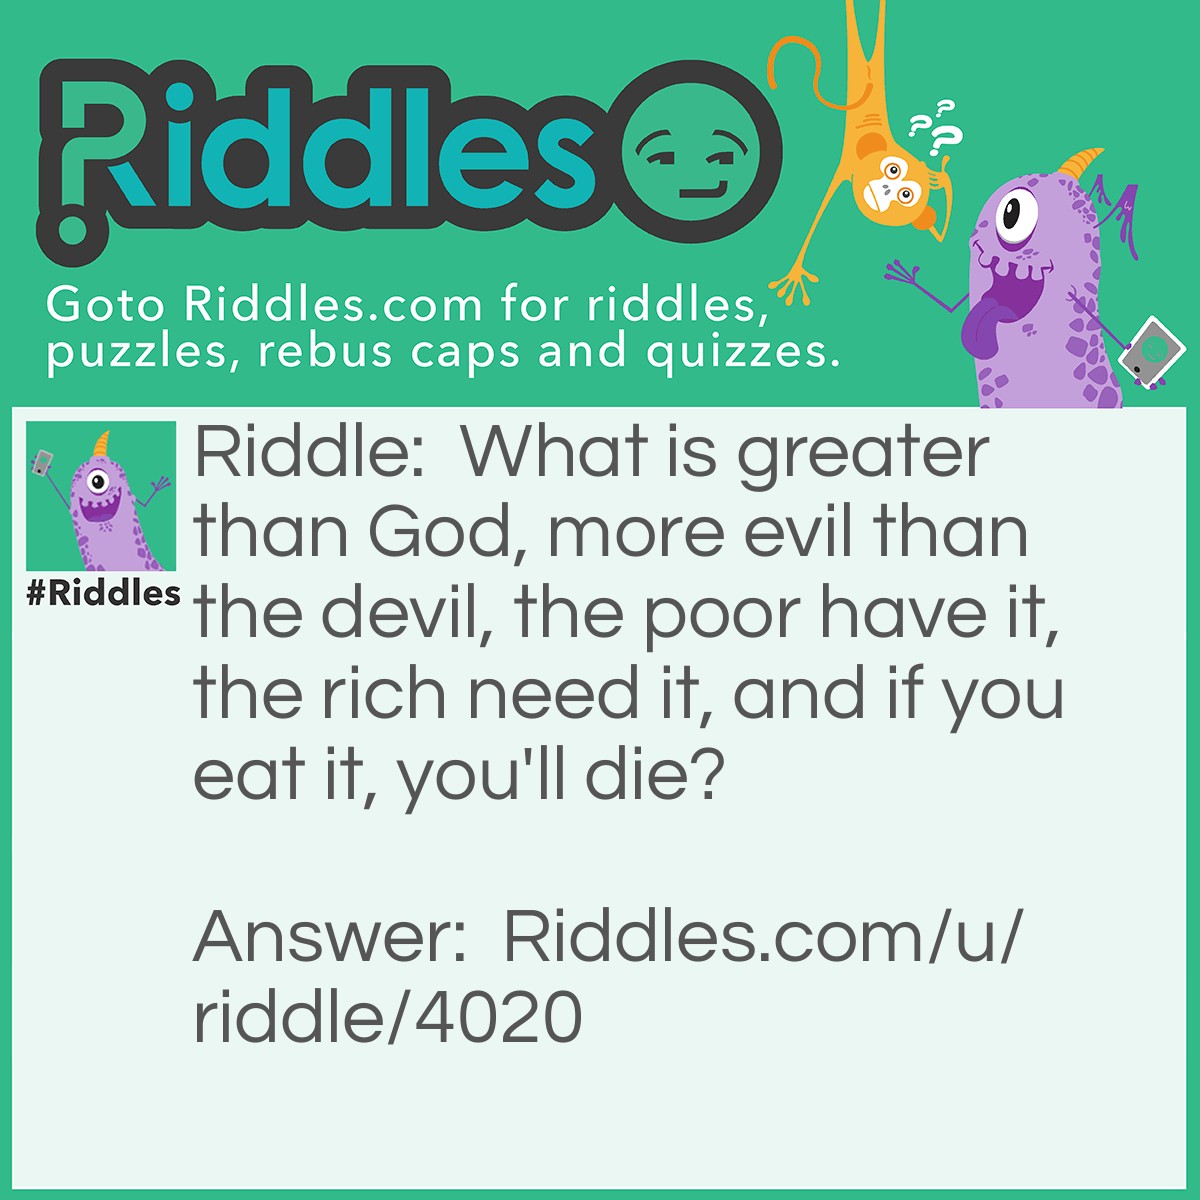 Riddle: What is greater than God, more evil than the devil, the poor have it, the rich need it, and if you eat it, you'll die? Answer: Nothing.